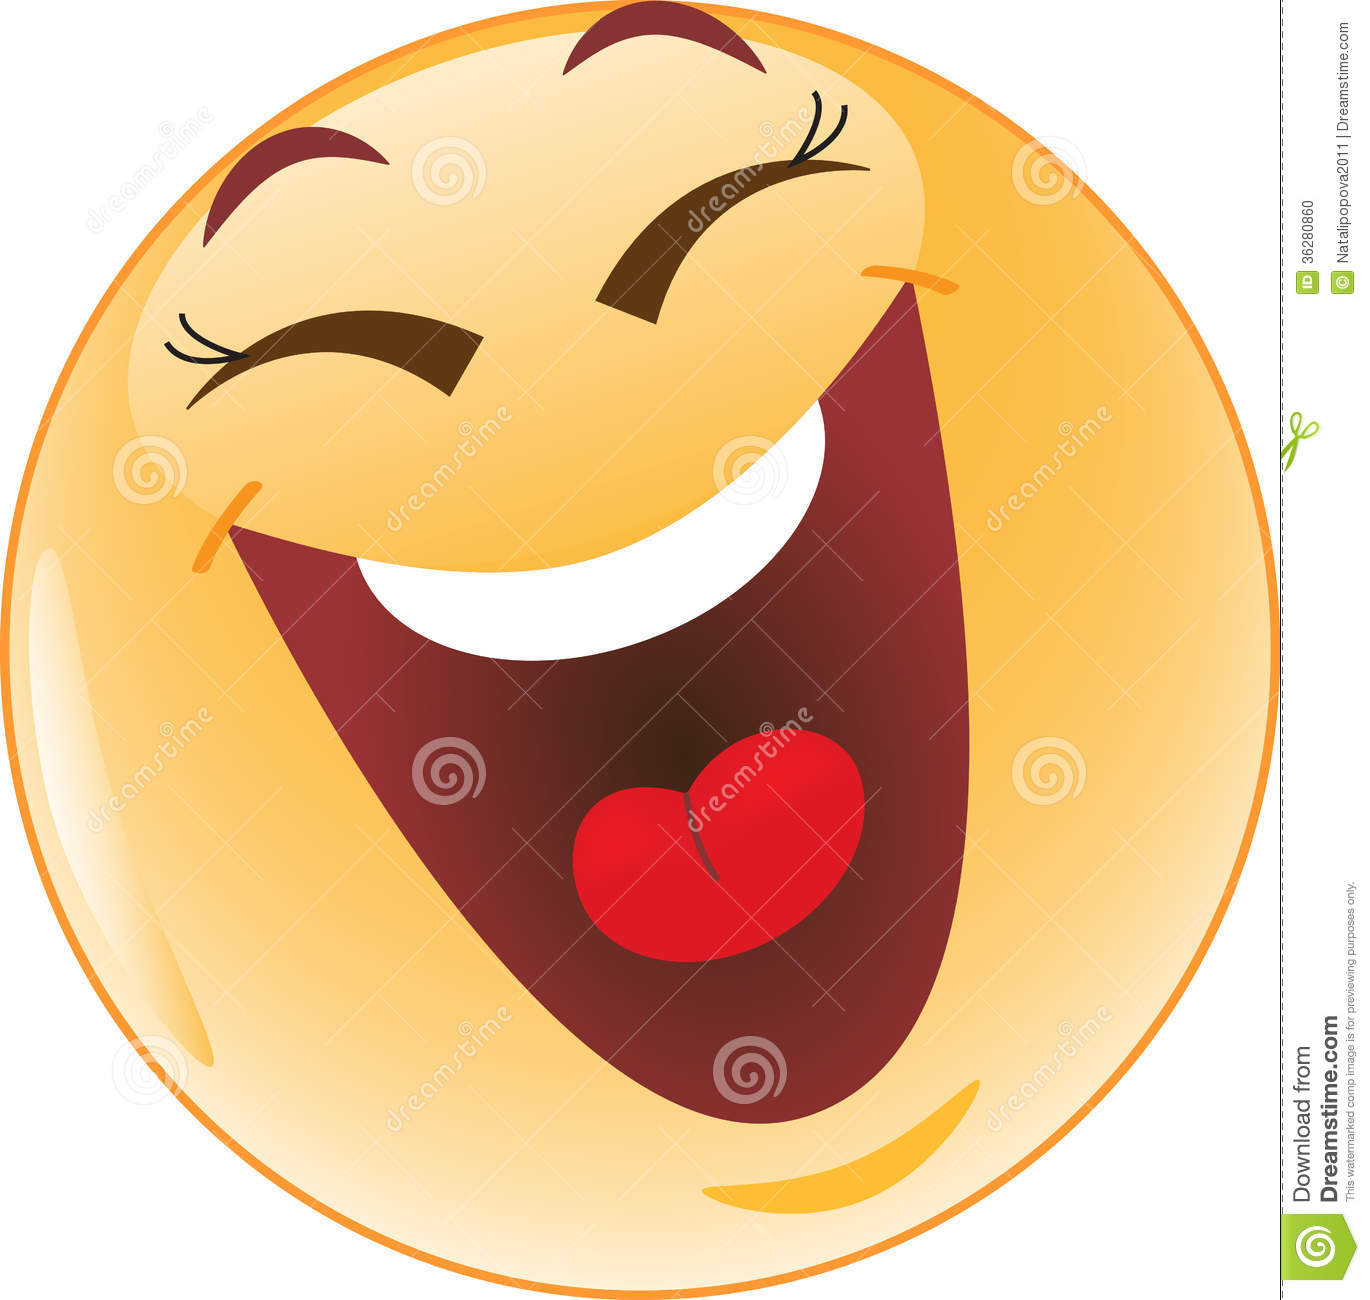 Hysterical Laughing Animated Smiley Faces